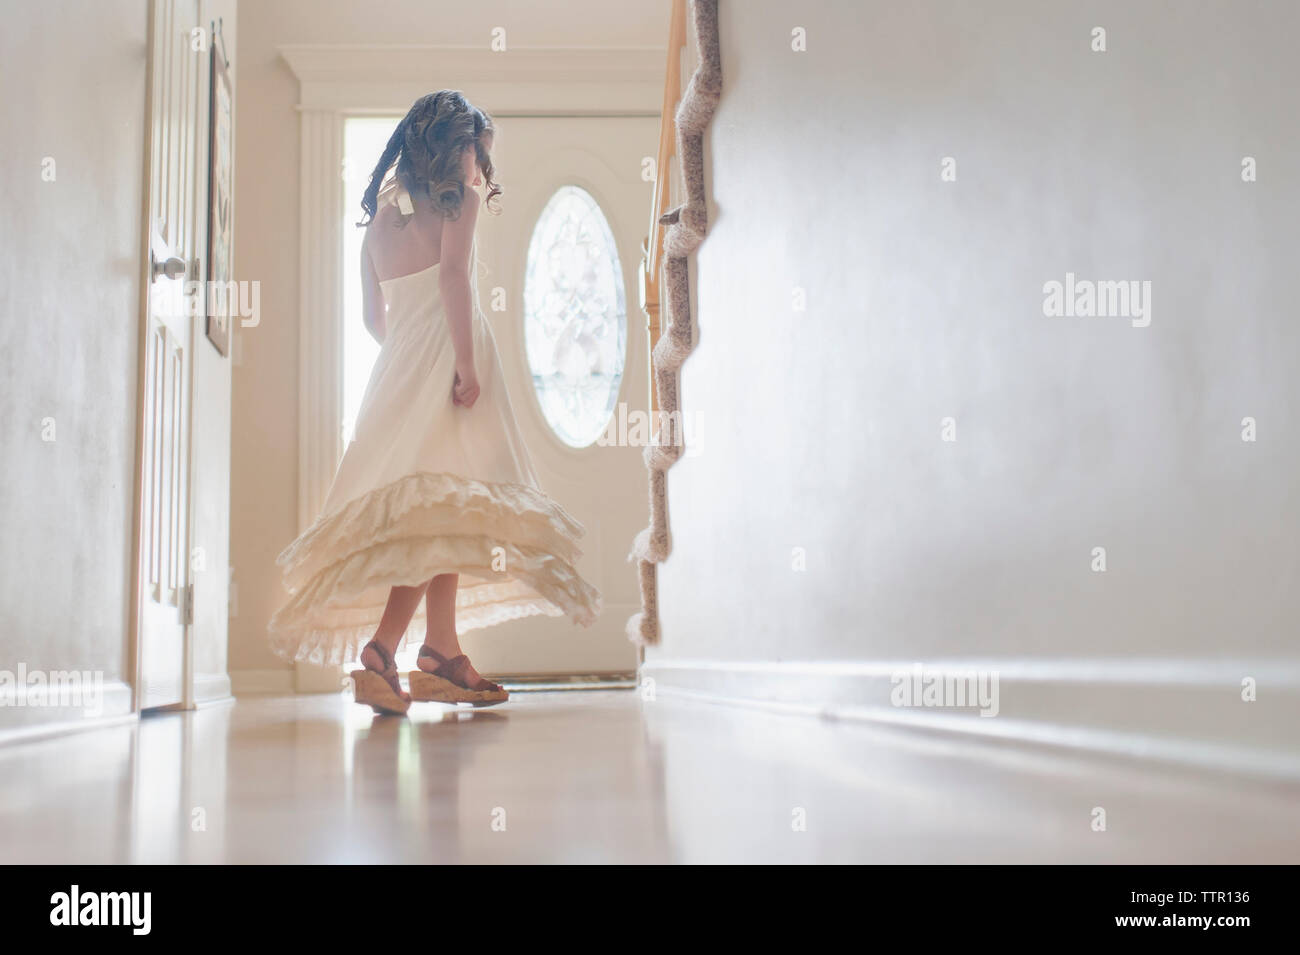 Girl in dress spinning by door at home Stock Photo